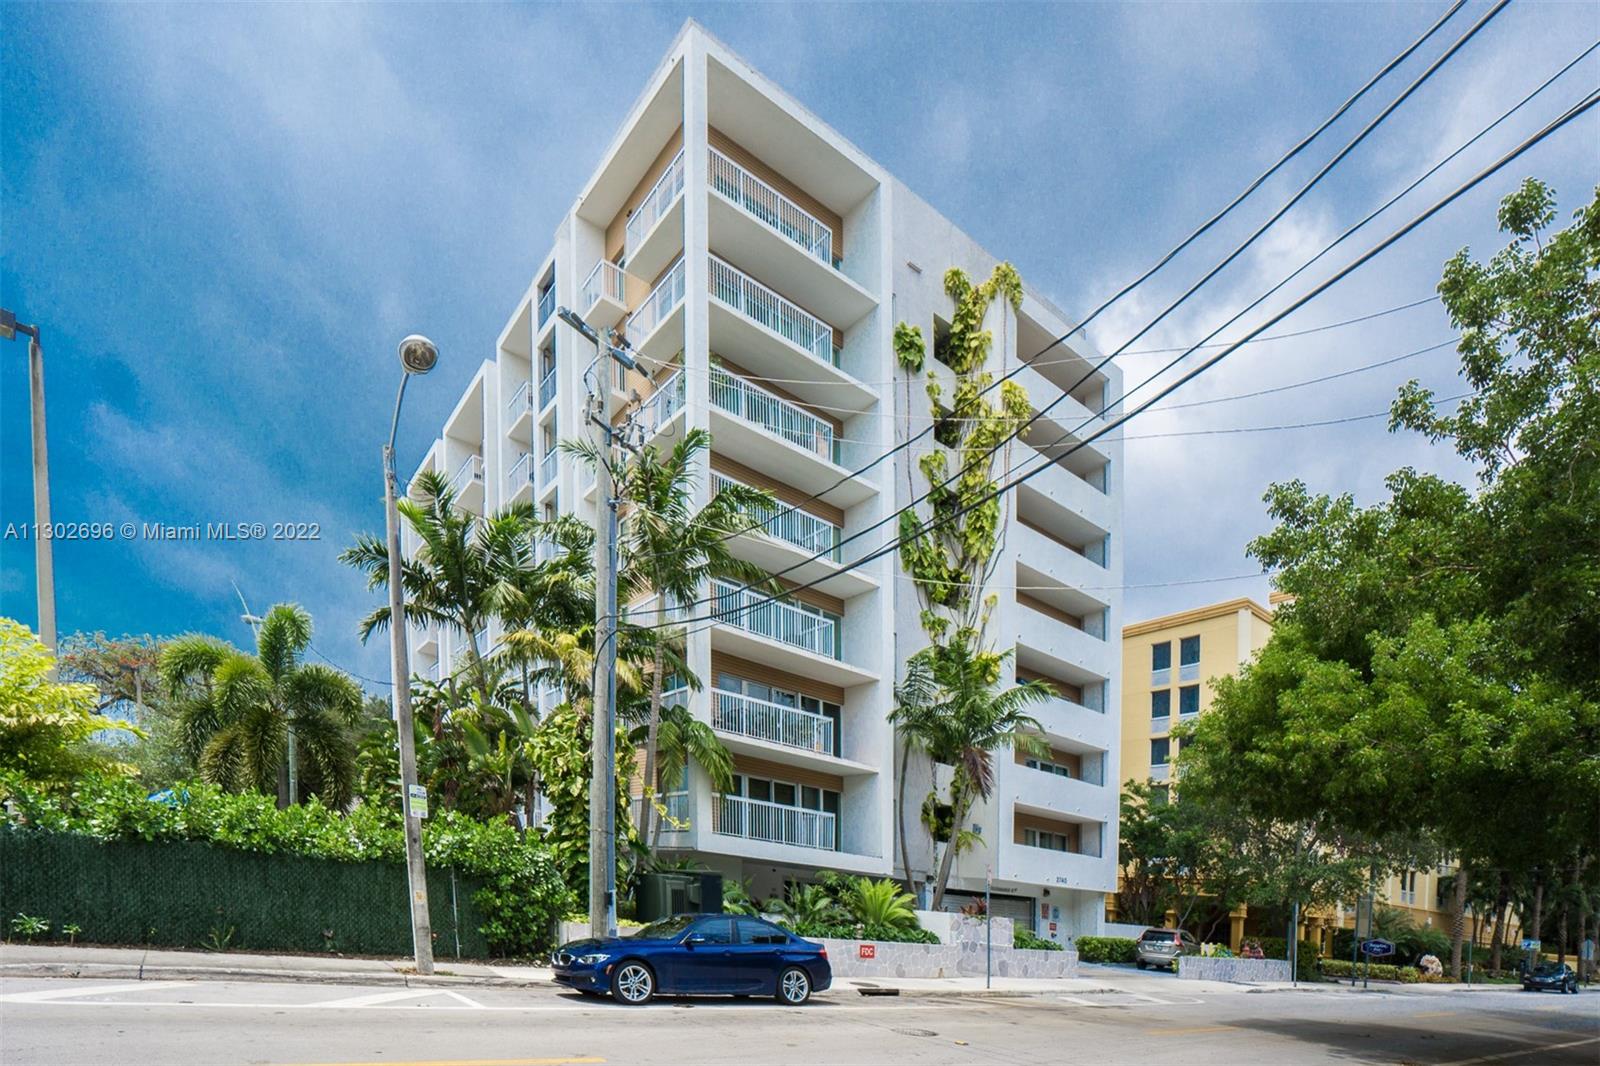 A rare find in Coconut Grove! This 1 bedroom + den unit is located in a boutique building, walking distance to Grove restaurants & parks, the Metro station and Cocowalk. Sizable unit with an open floor plan. Large kitchen opens up to the living area and den. Double balconies off of the living room and bedroom. Building amenities include a rooftop terrace & pool and gym. Washer/dryer in unit, 1 gated assigned parking space. Additional on street monthly parking can be rented from the city for $50 monthly.